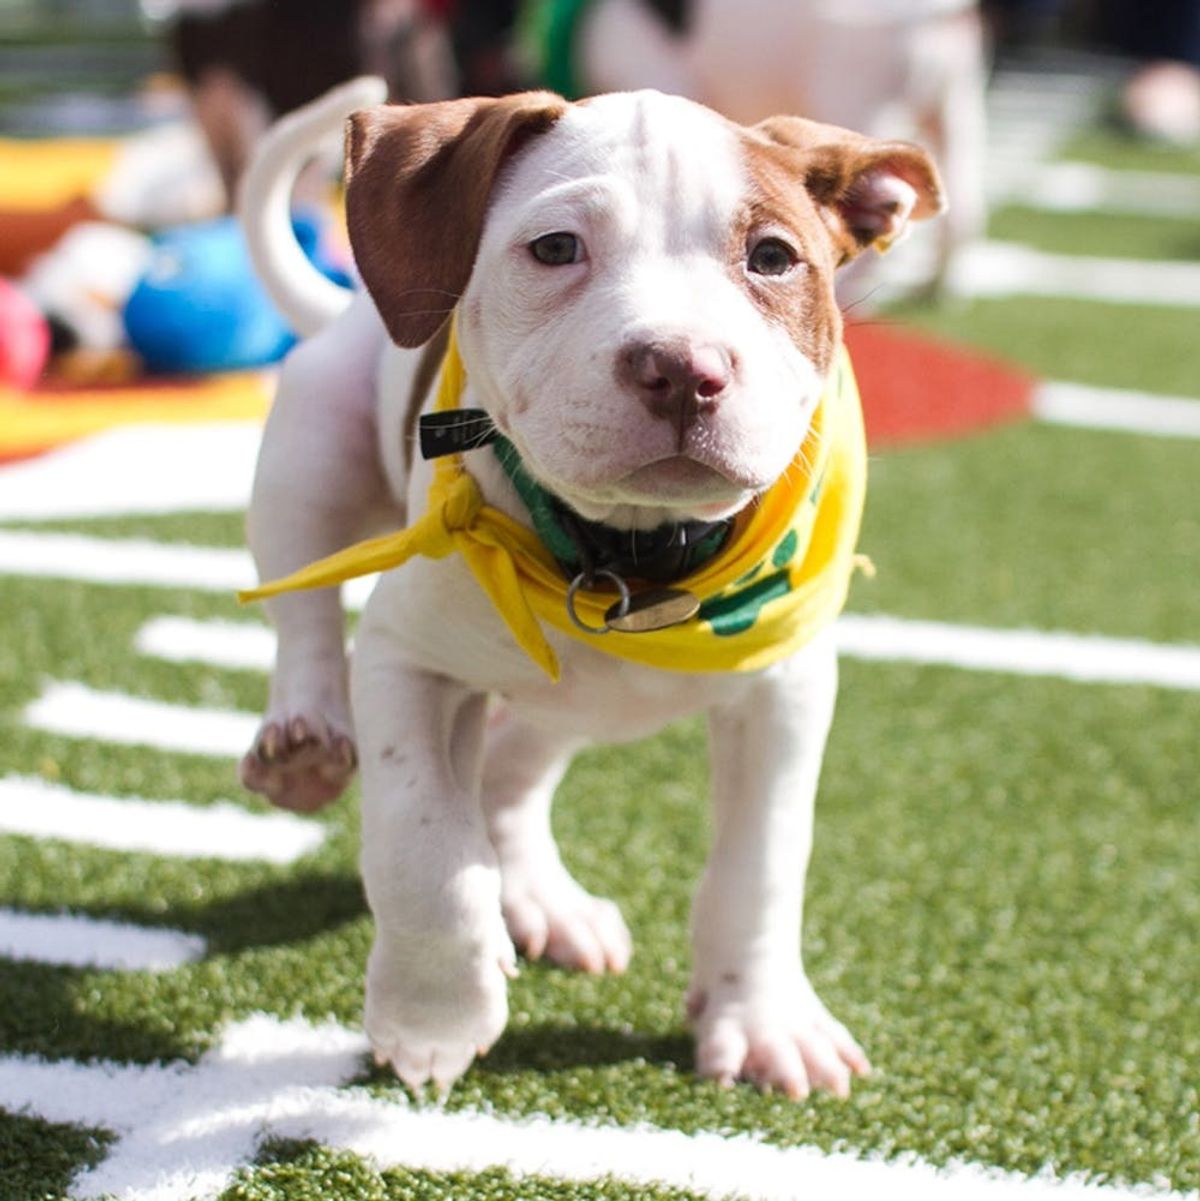 We Met the MVPups of This Year’s Puppy Bowl (And Almost ODed on Cuteness)